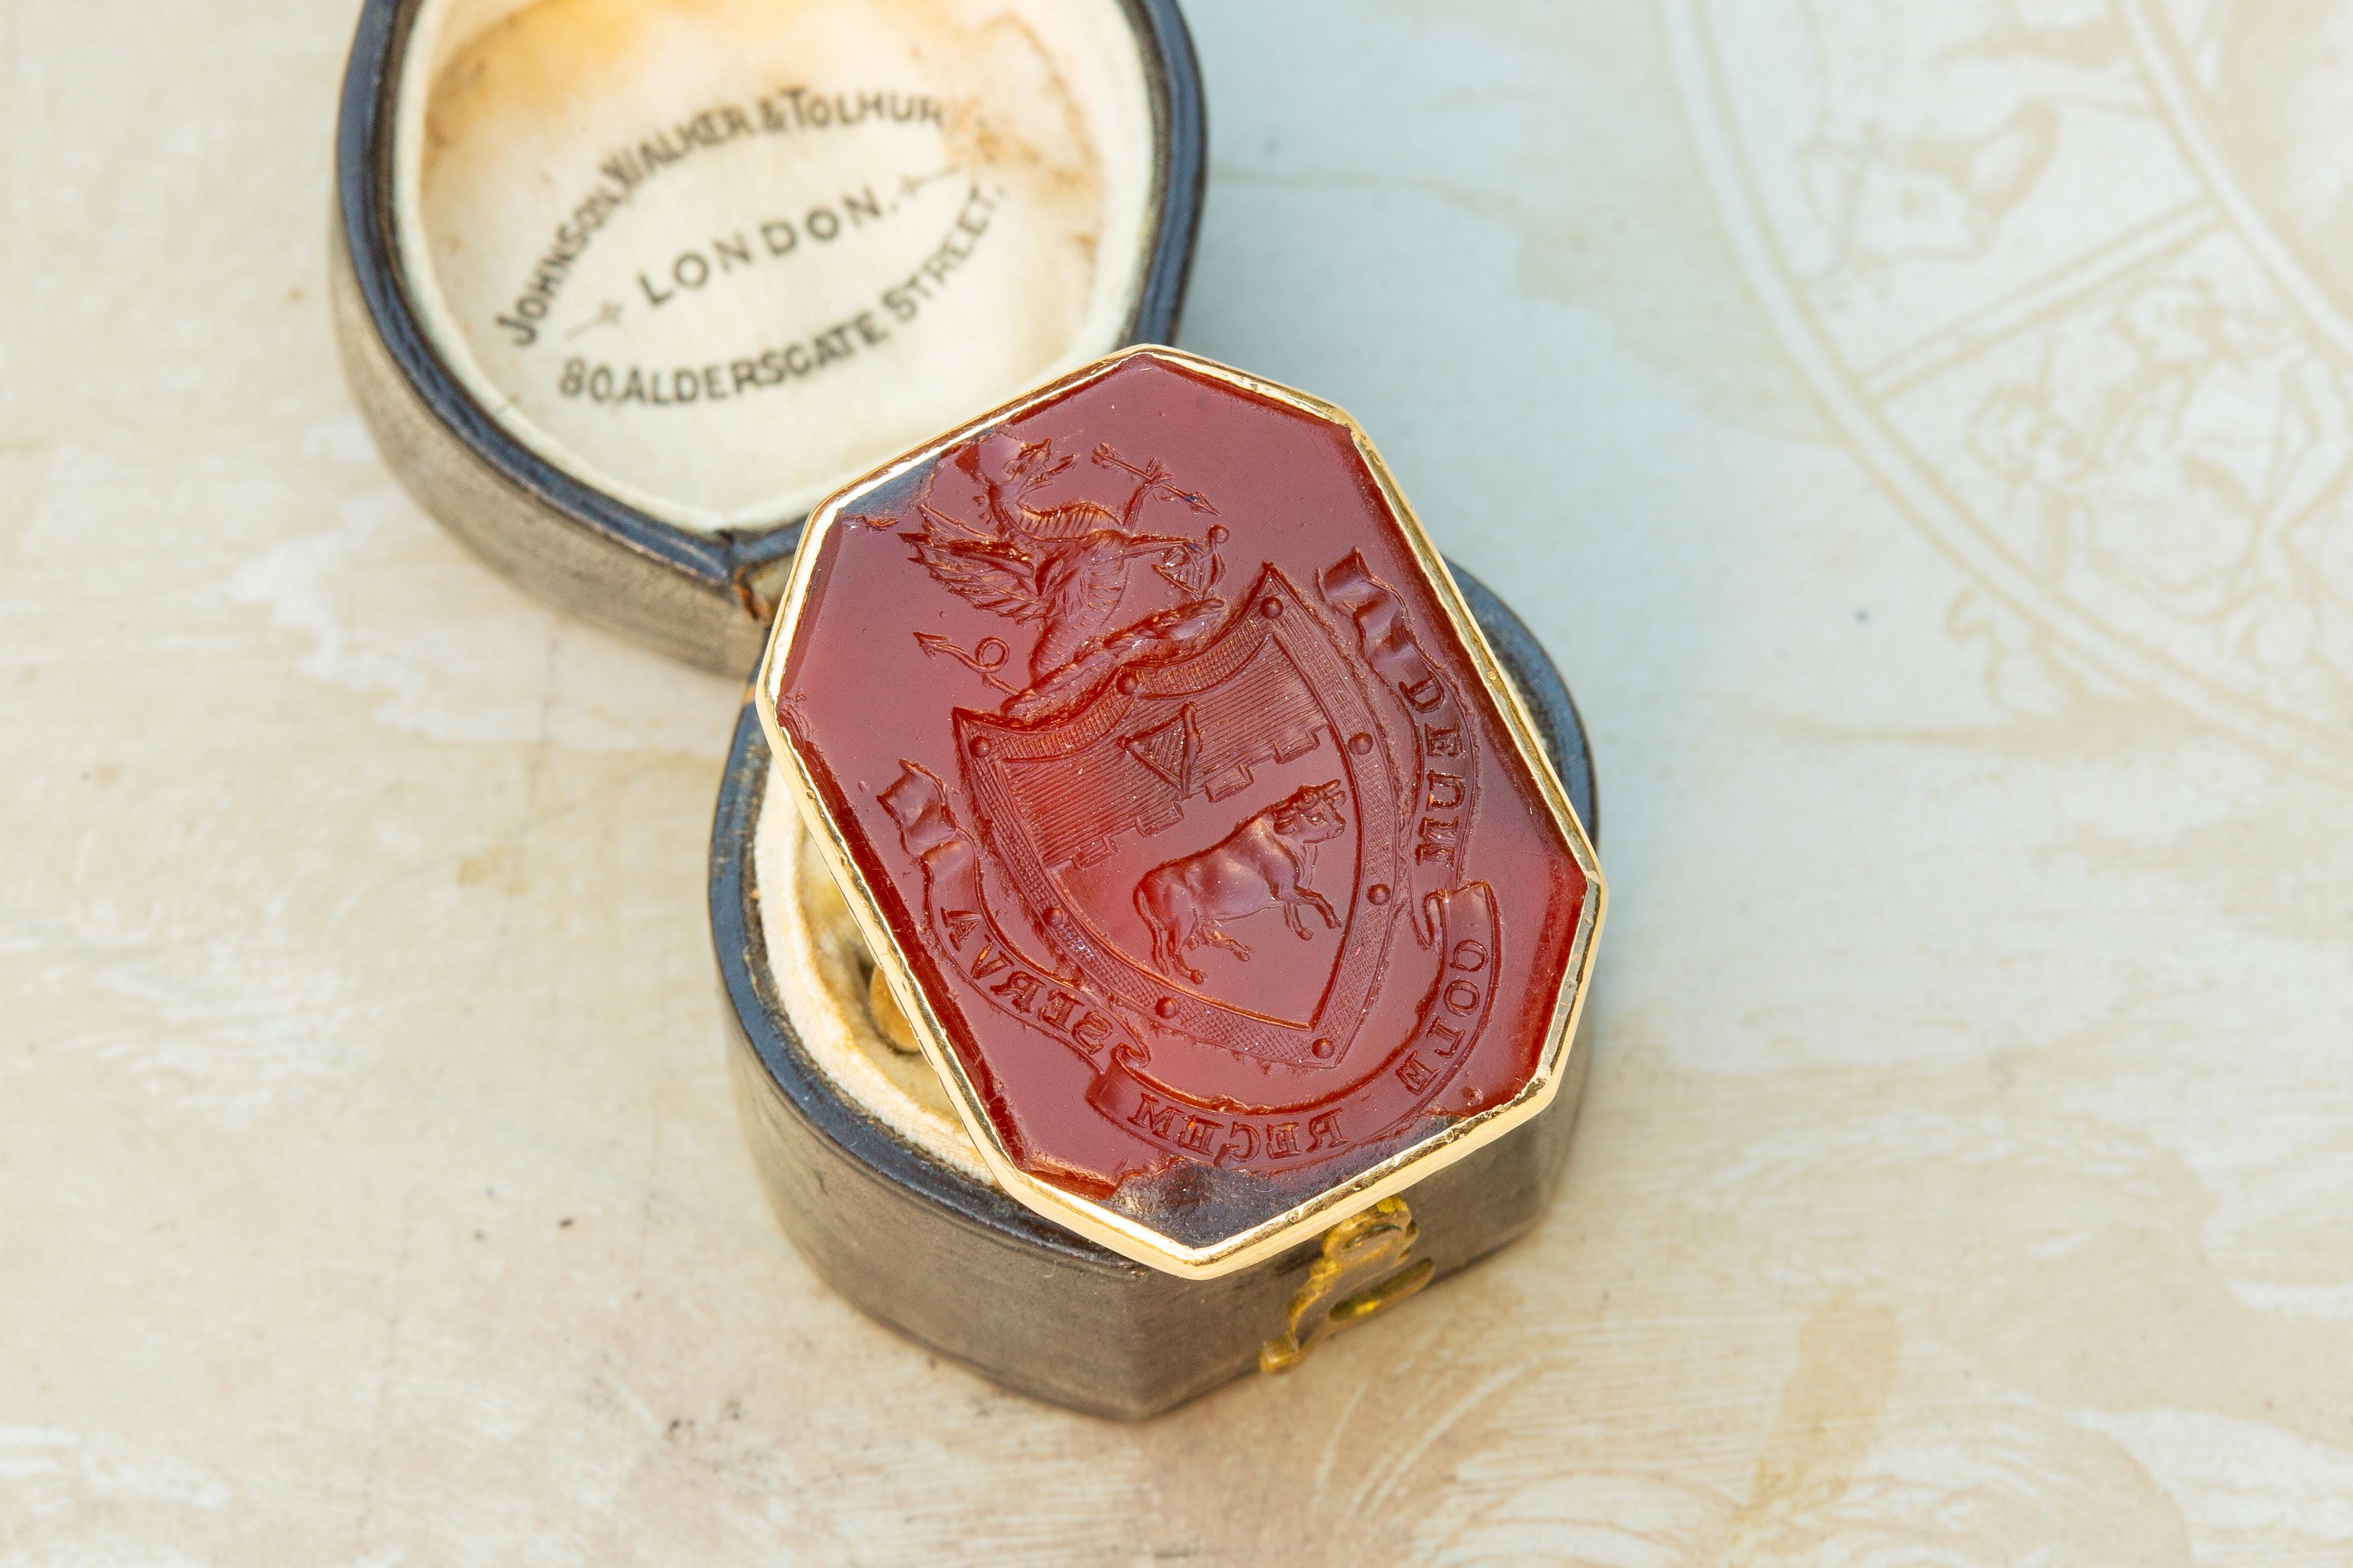 A large, heavy gold Irish noble signet ring, set with a carnelian intaglio depicting the coat of arms of the aristocratic Cole family. The stone would have originally been set into a large fob or desk seal, to be used for sealing deeds and important